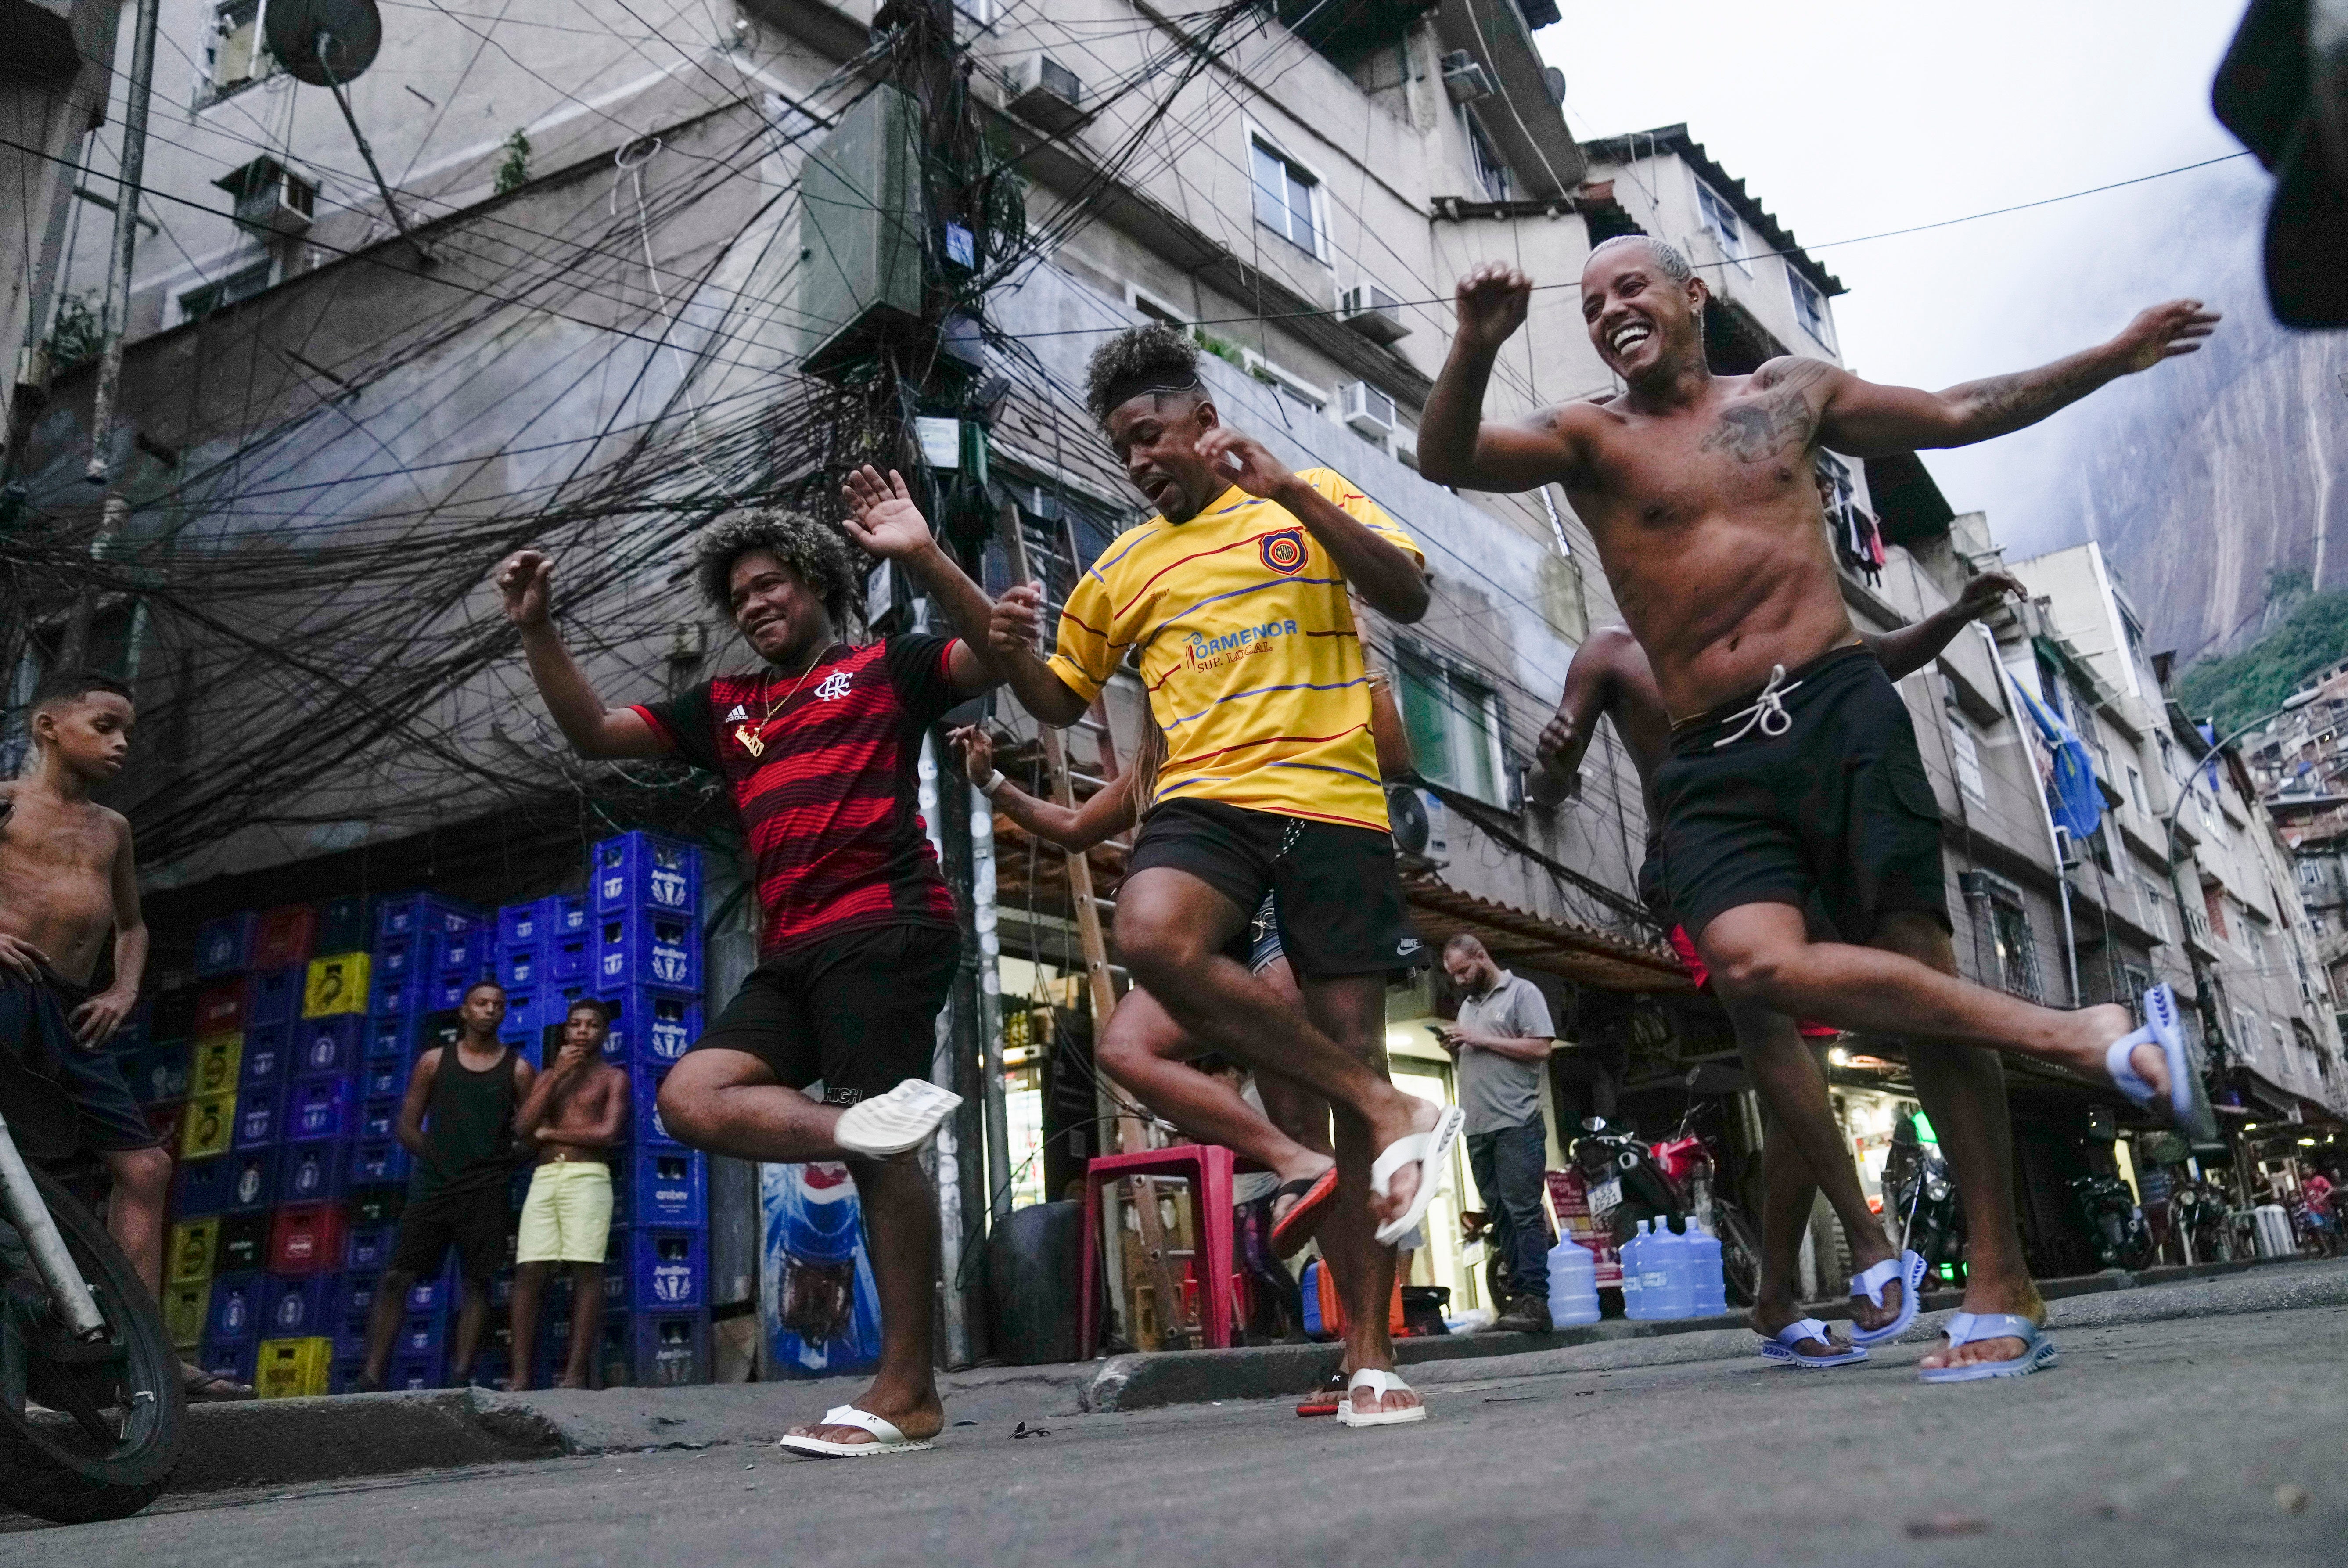 Youth perform a street dance style known as passinho for their social media accounts